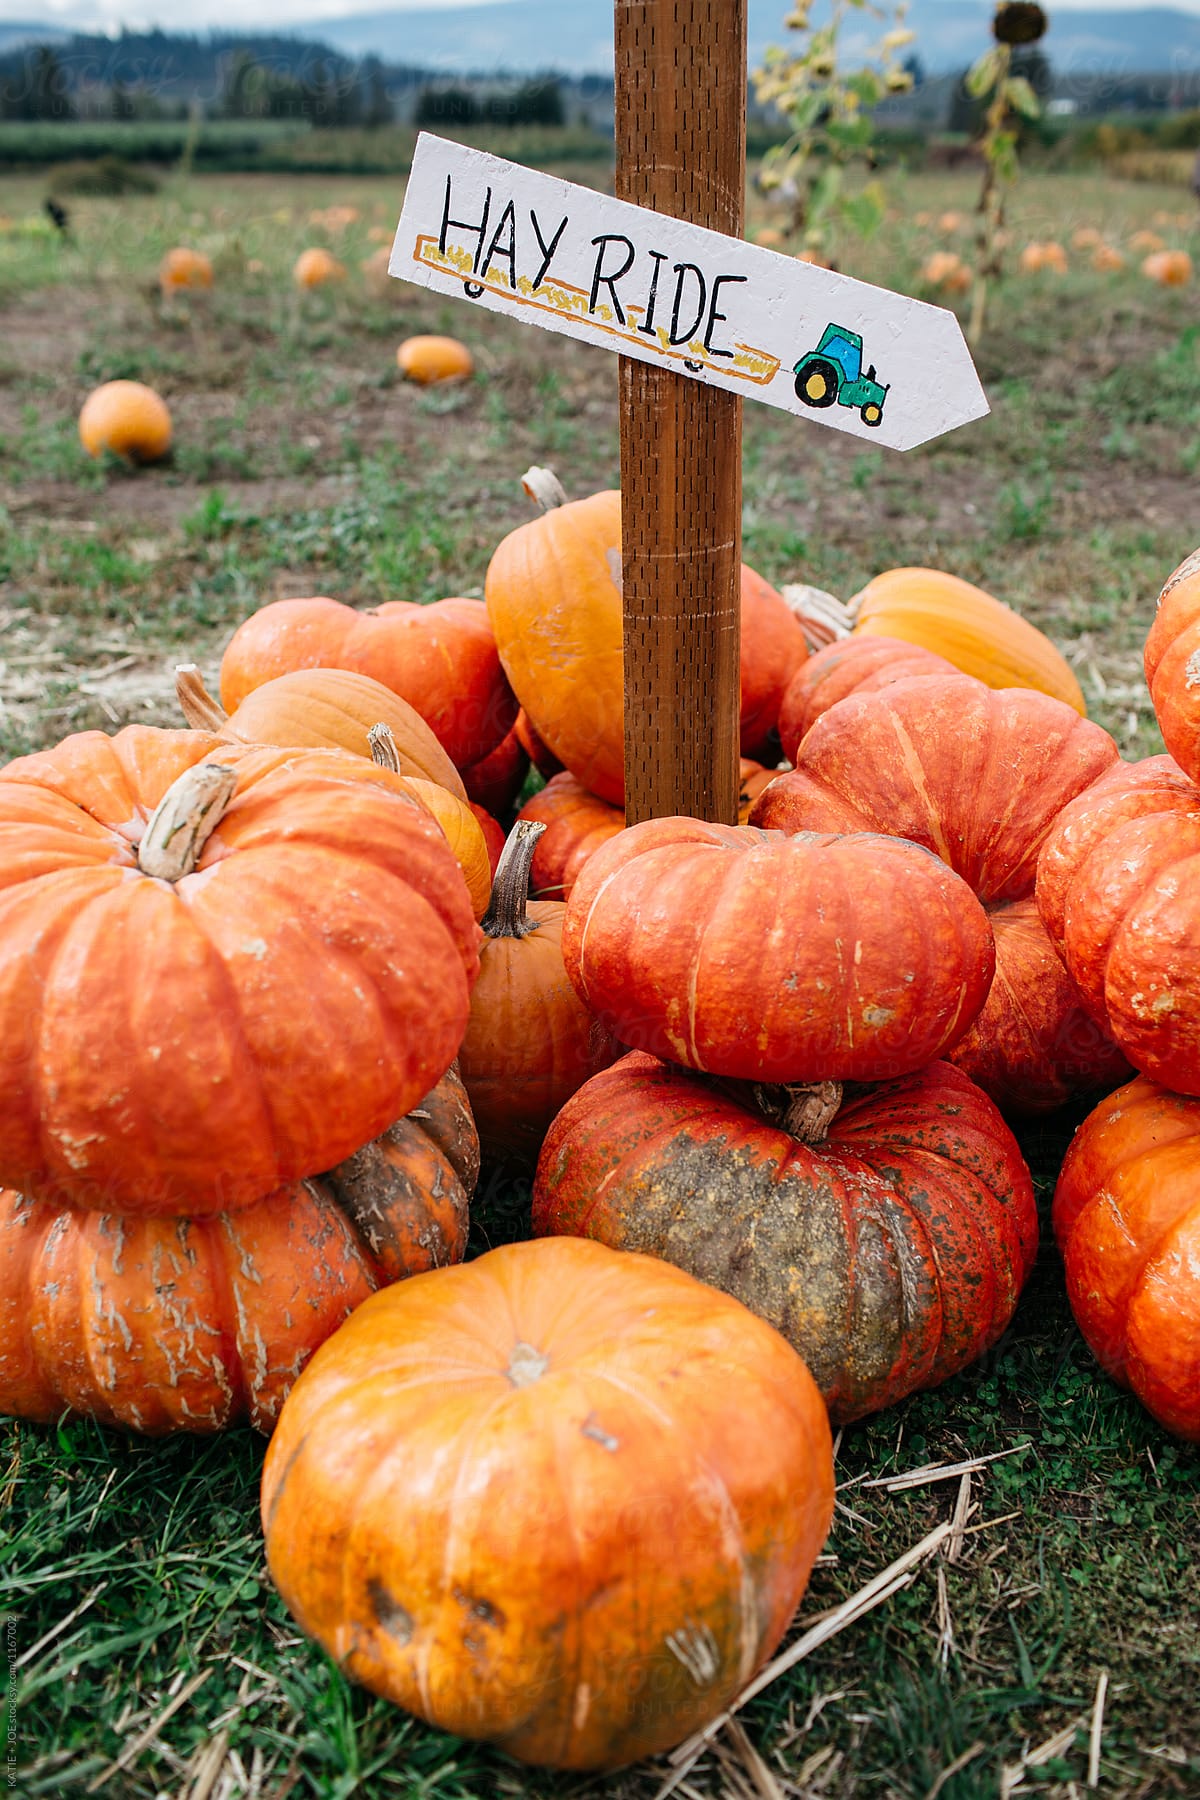 Pumpkins and gourds stacked below a hay ride sign